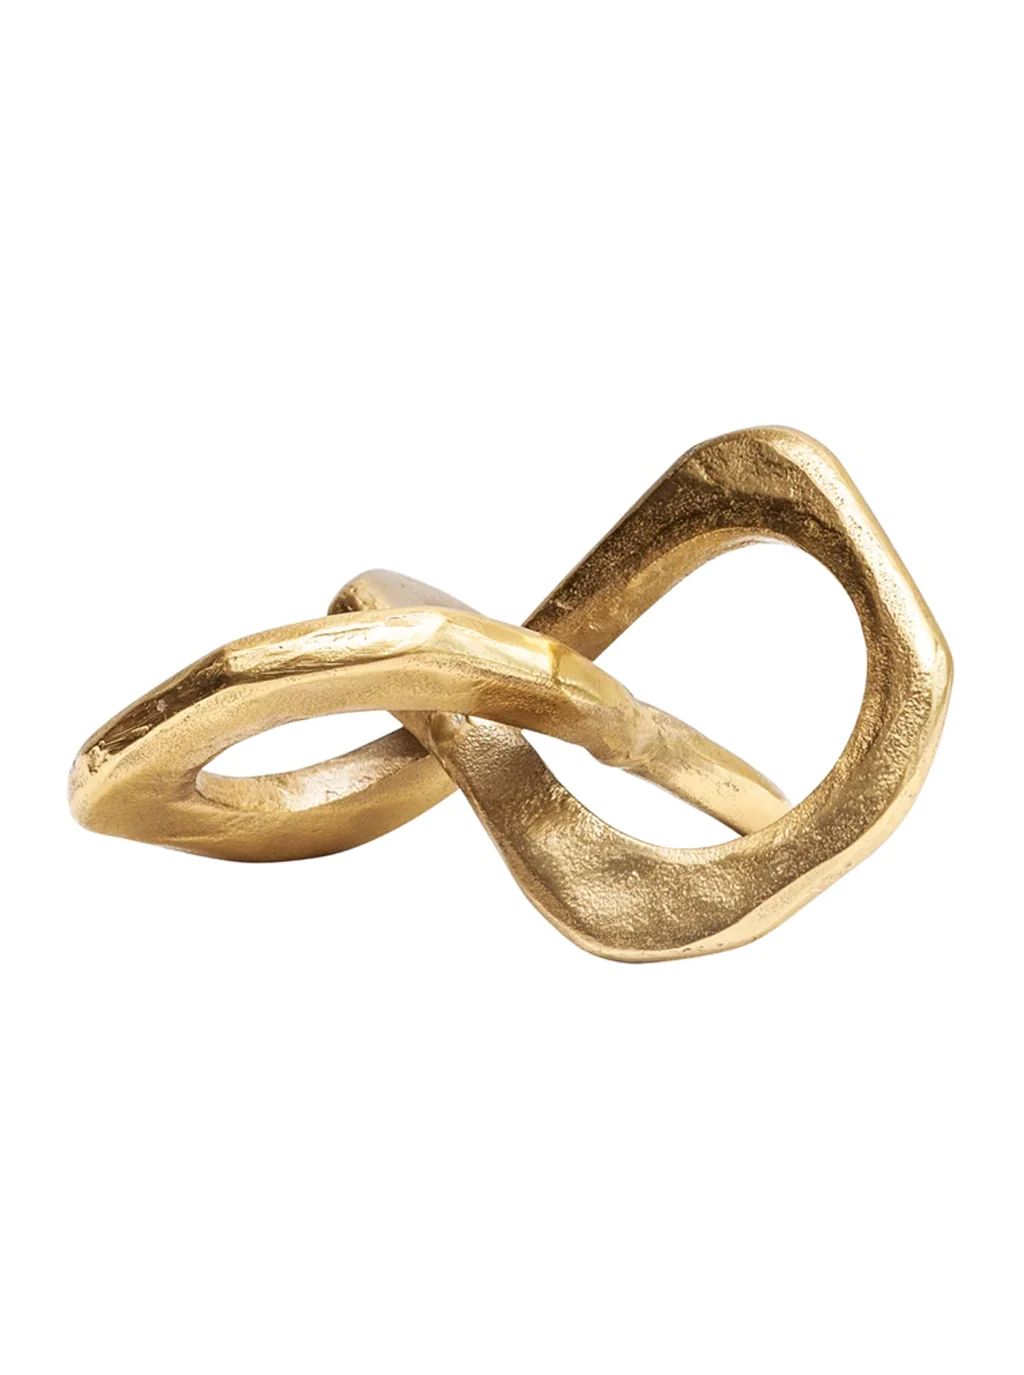 Gold Knot Object | House of Jade Home